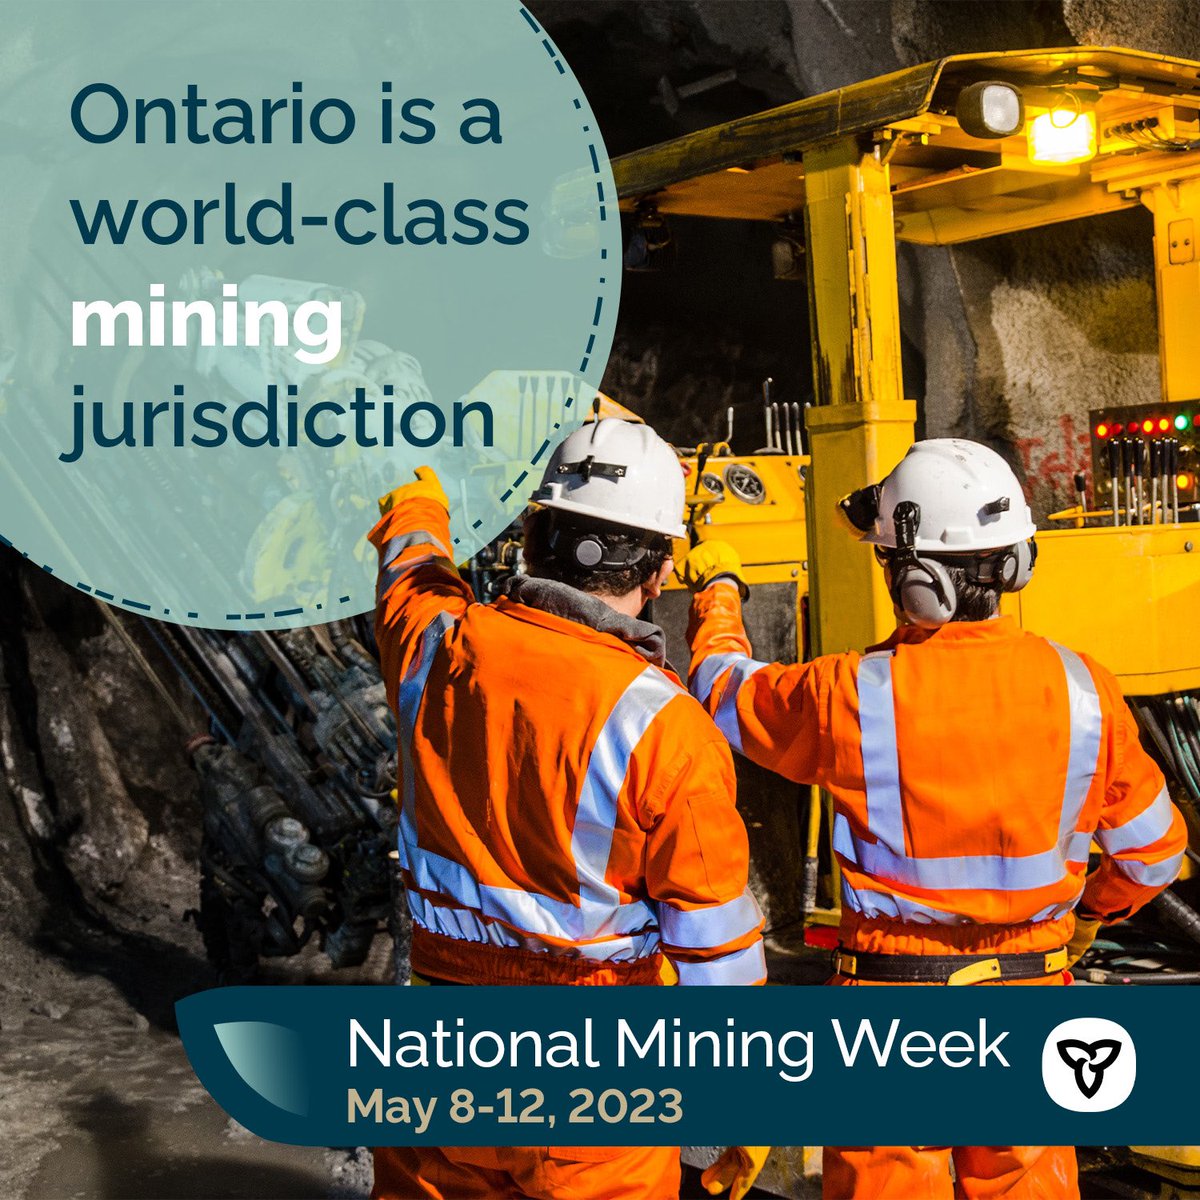 This week is #NationalMiningWeek!
 
Ontario is open for business and is developing the critical minerals that will power batteries and electric vehicles. This week let’s recognize and celebrate the important work of our mining sector. ⛏️